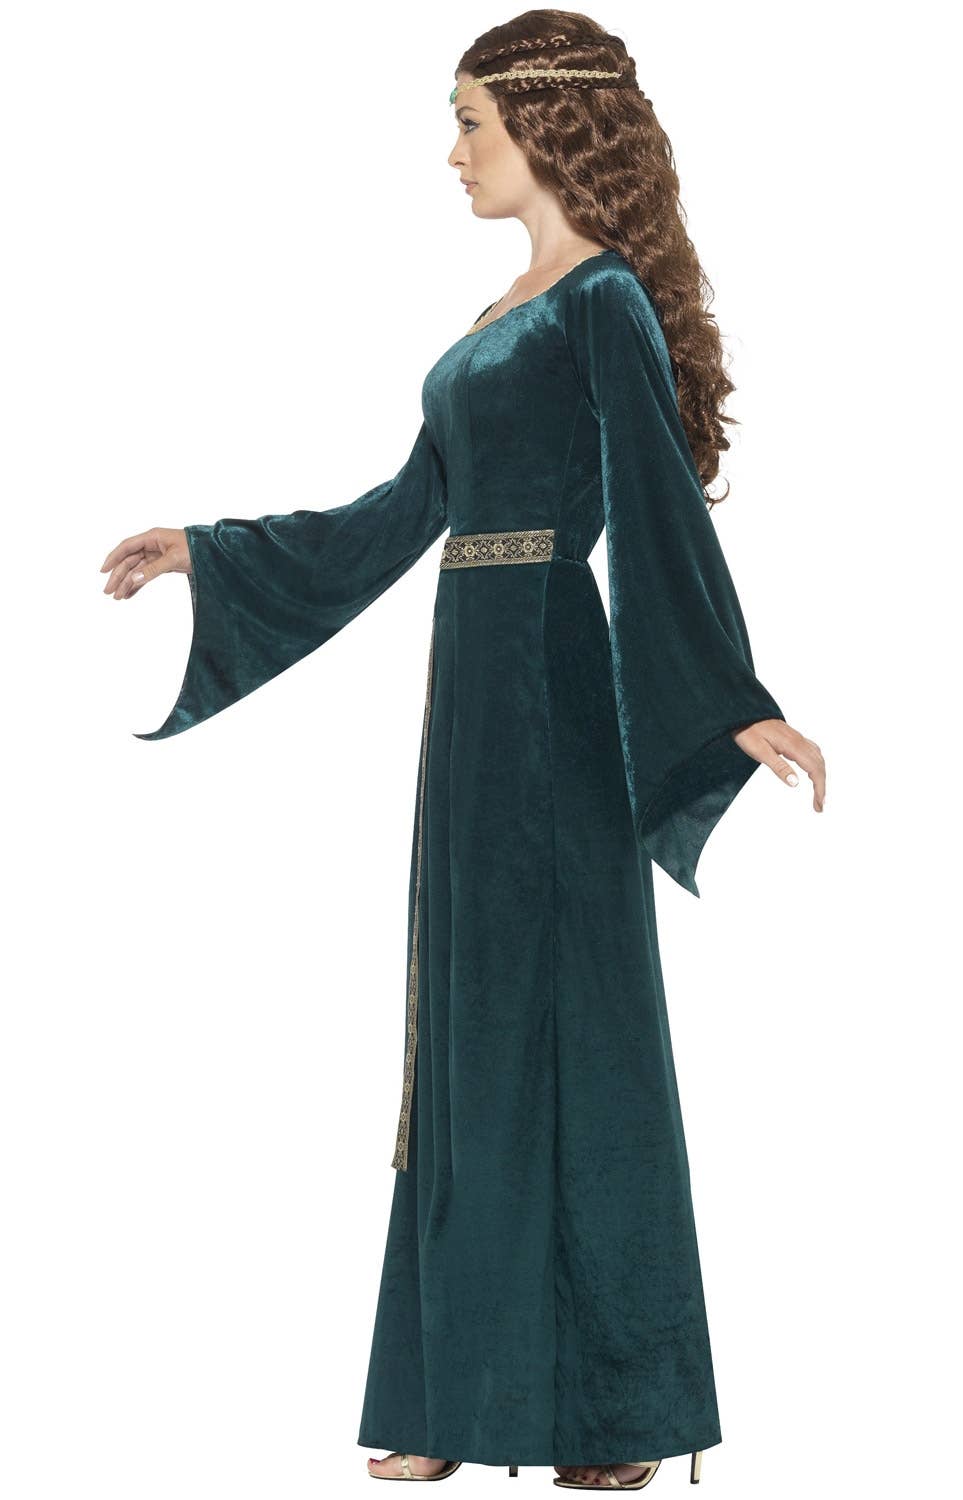 Women's Plus Size Green Medieval Costume Dress - Side Image